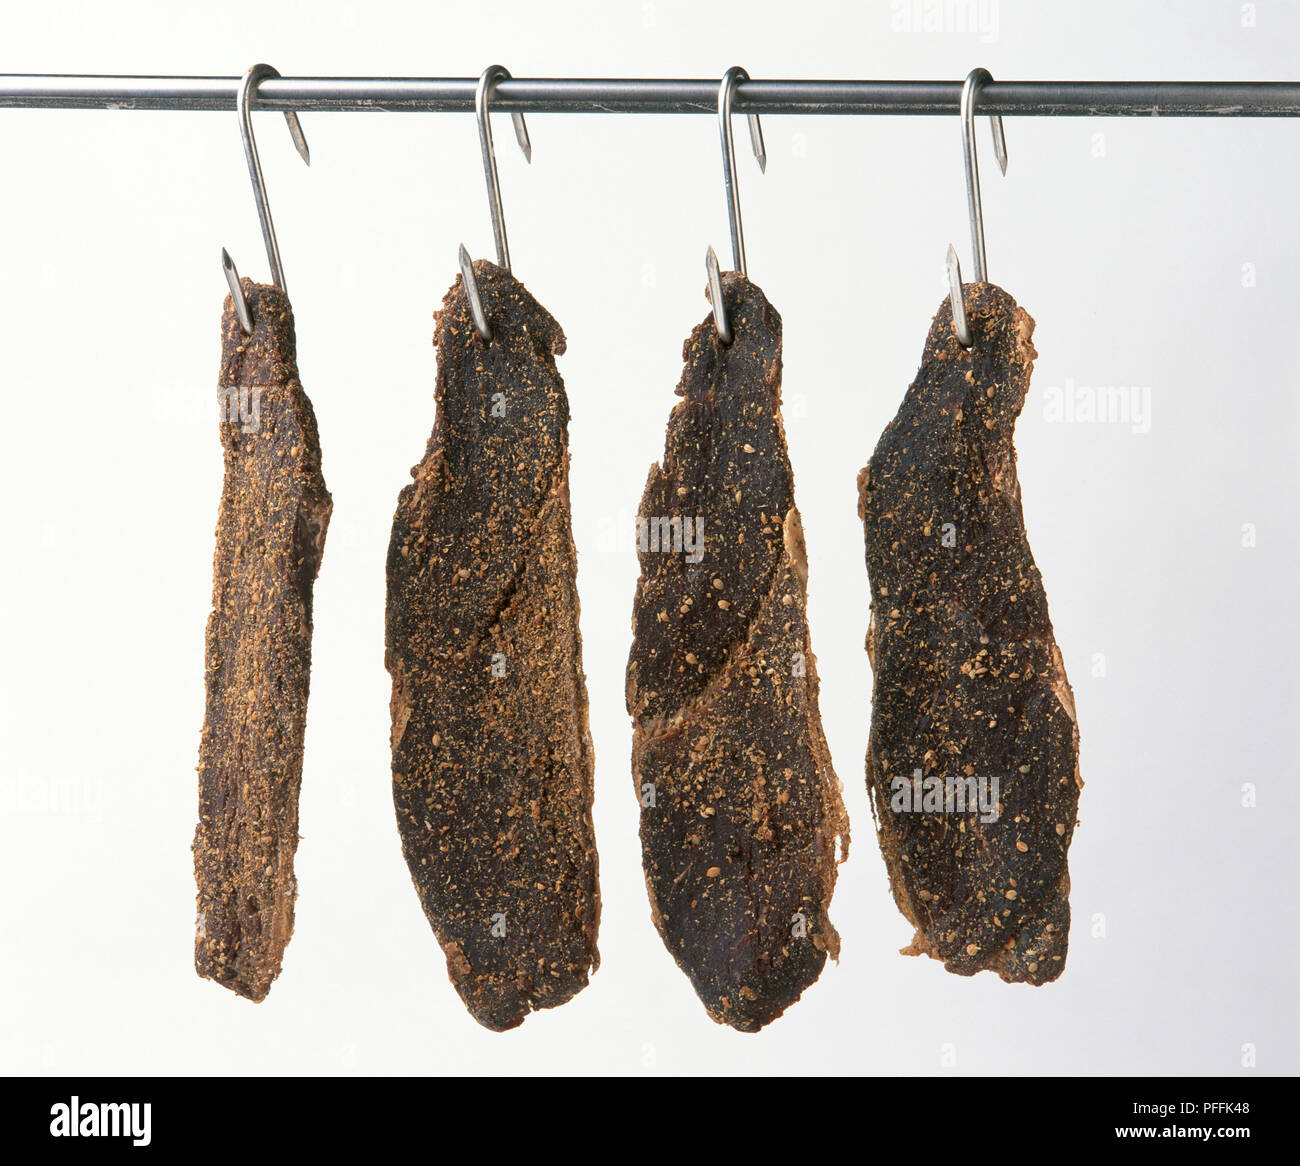 Cured biltong hanging from meat hooks Stock Photo